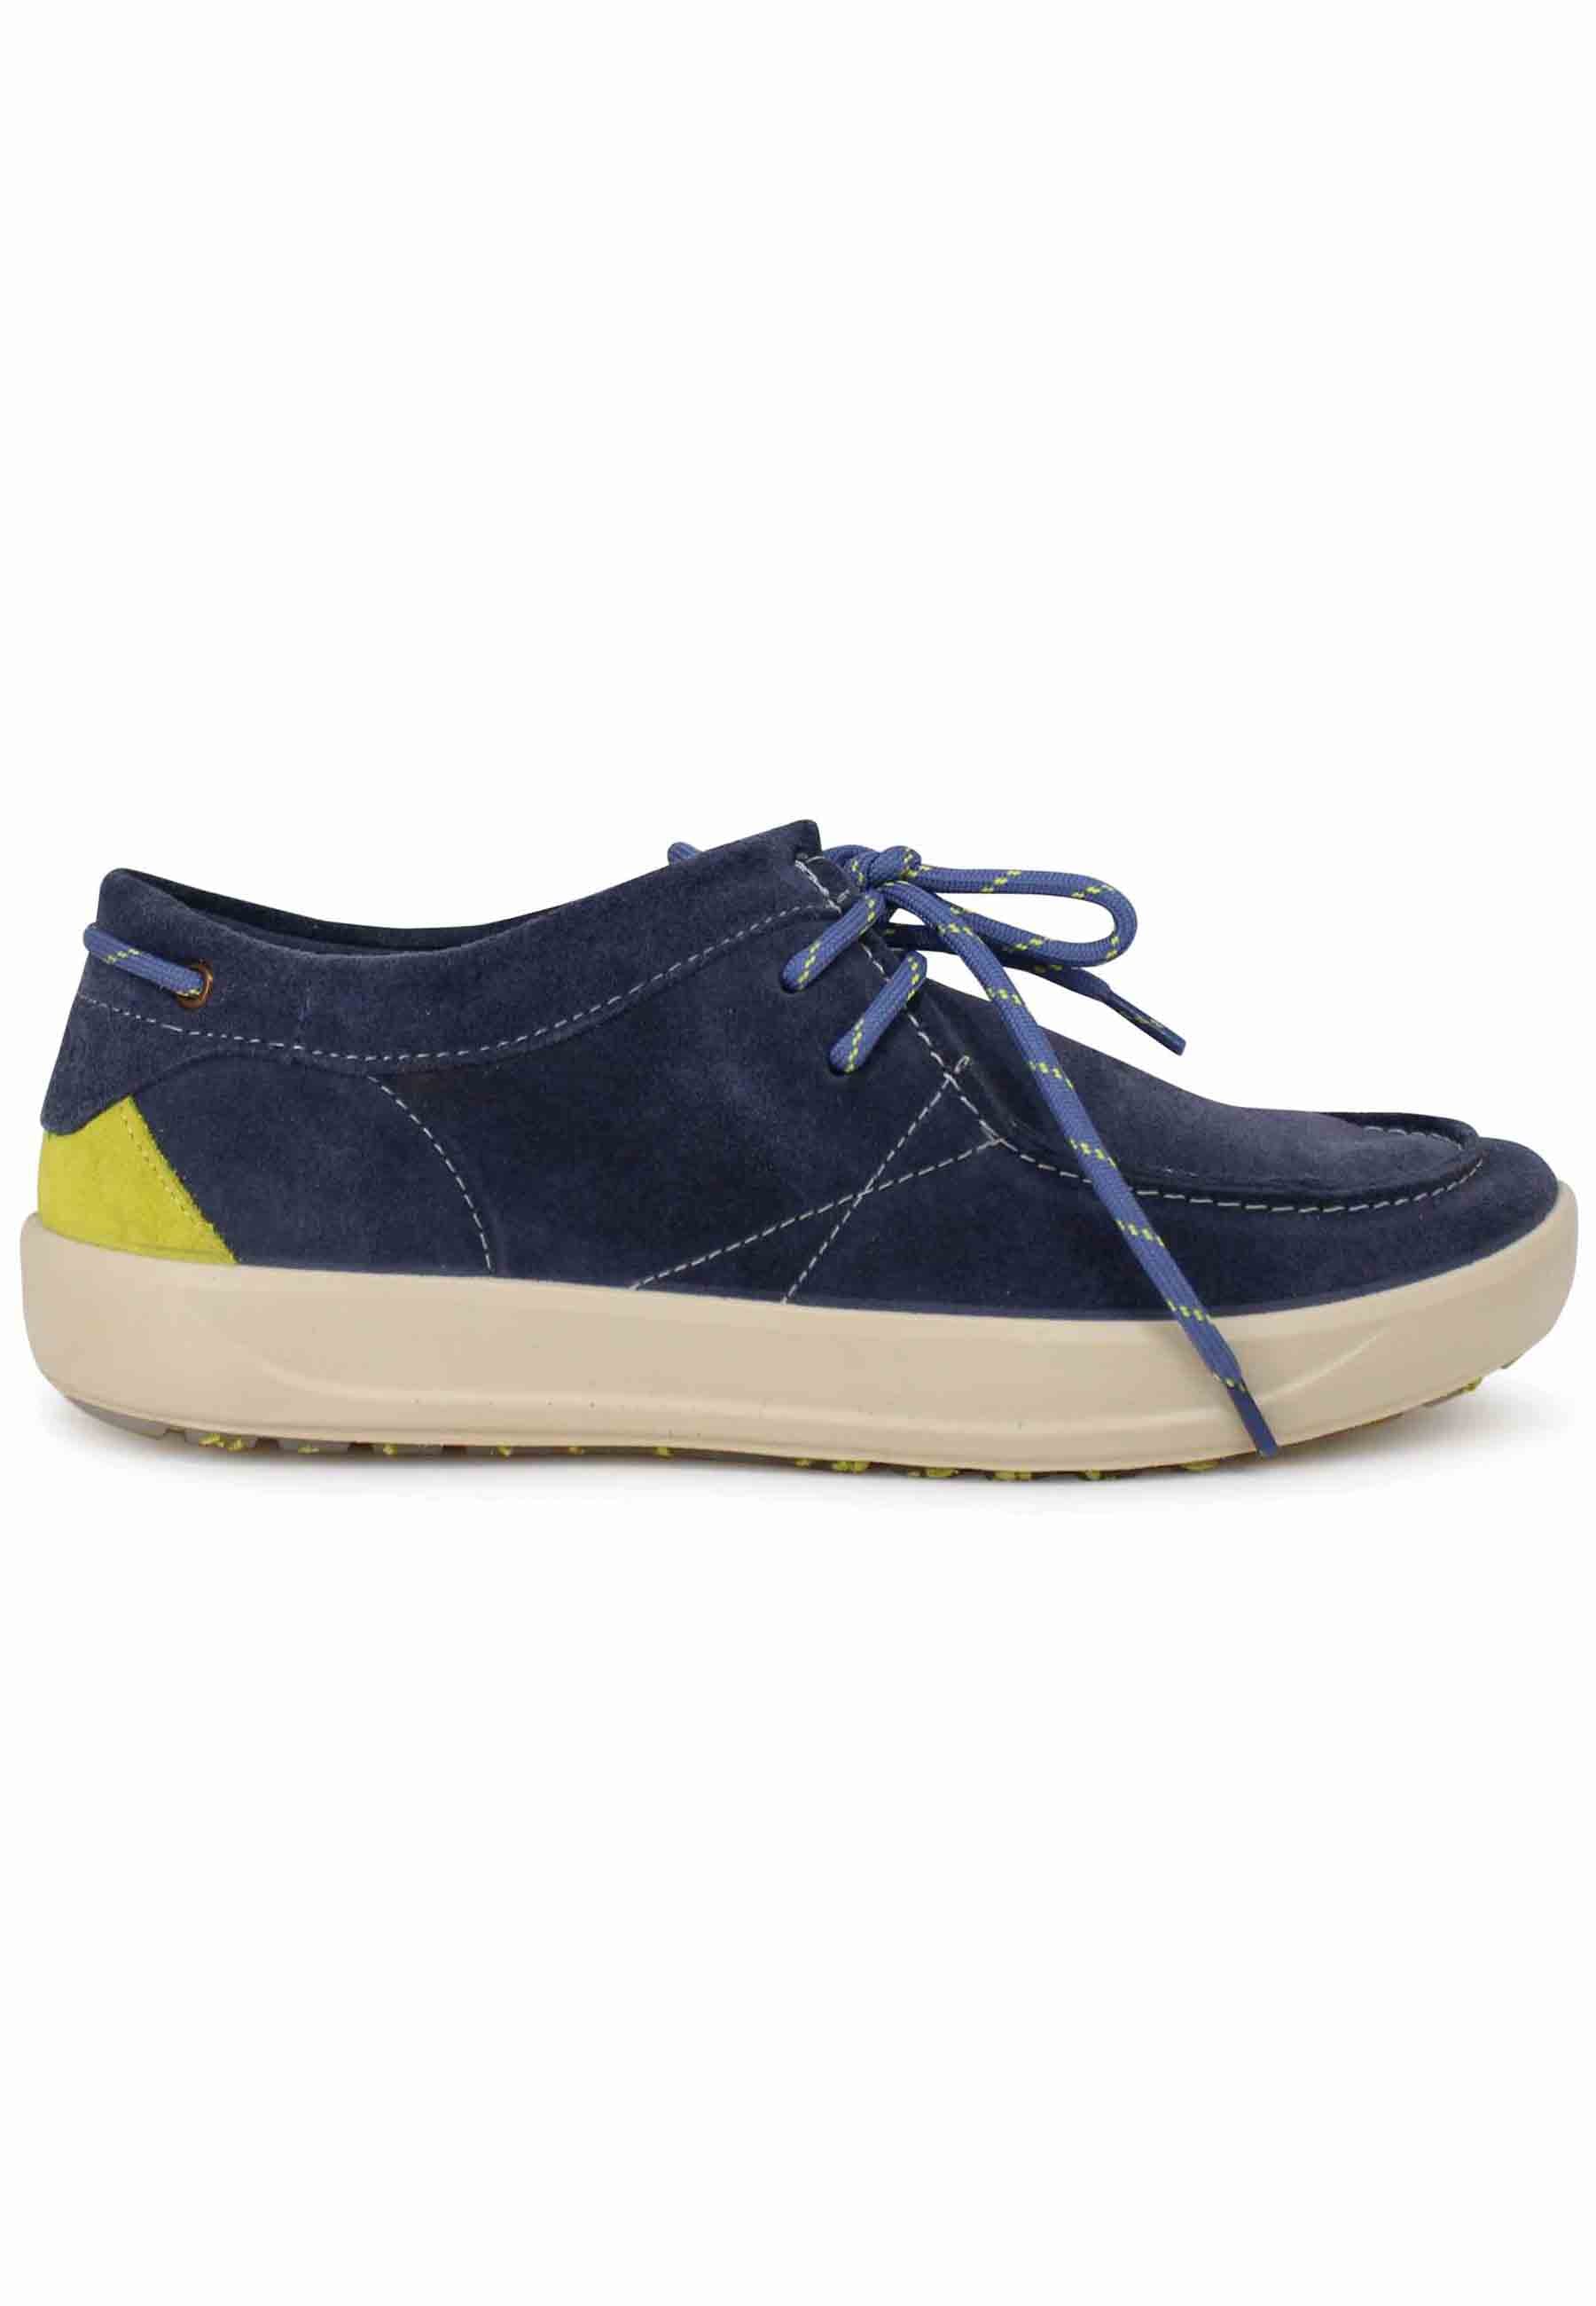 Bob Cat men's lace-ups in blue suede with rubber sole